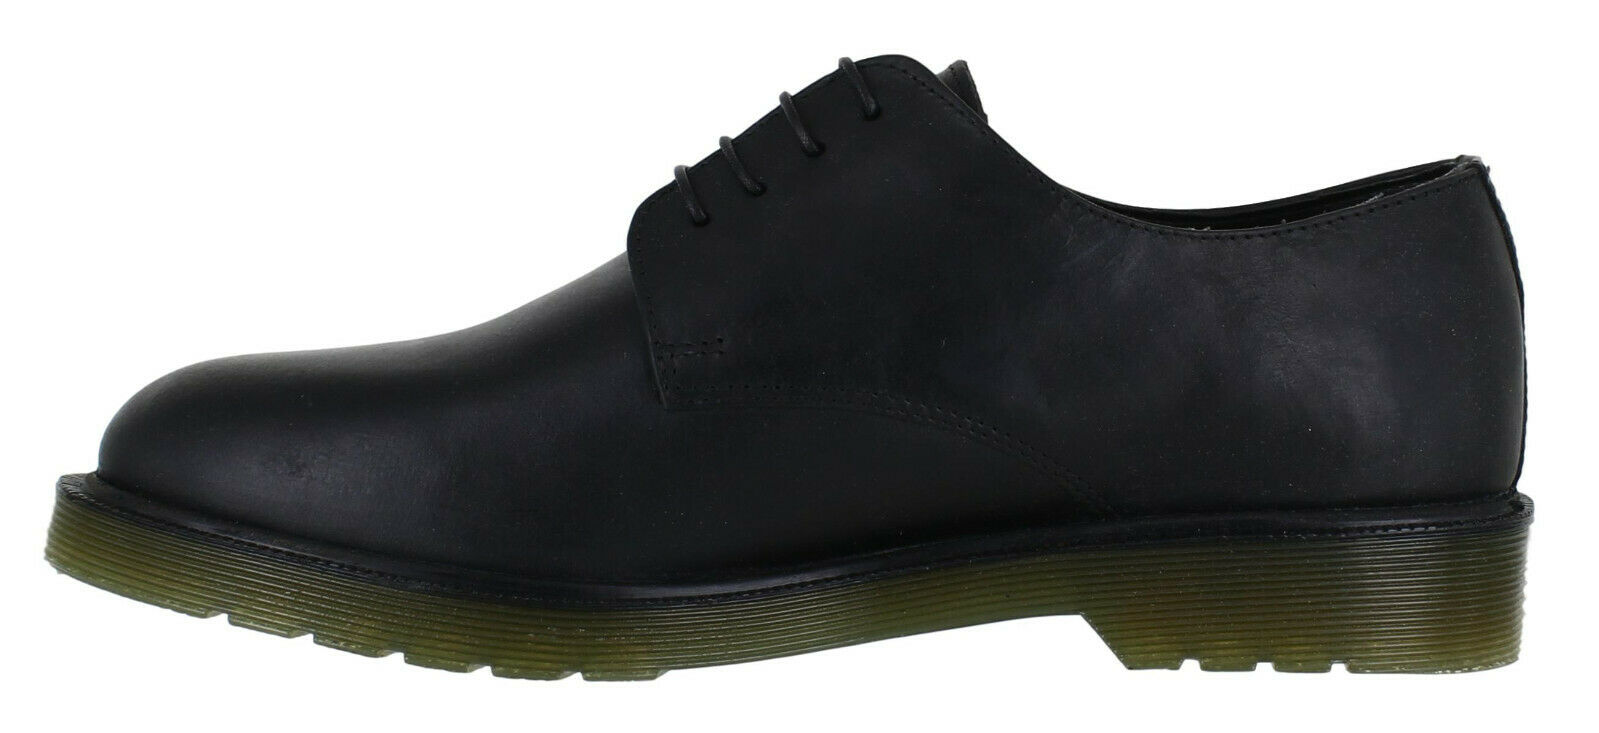 Mens Oaktrak Harby Air Cushioned Sole Smart Lace Up Work Shoes Sizes 7 ...